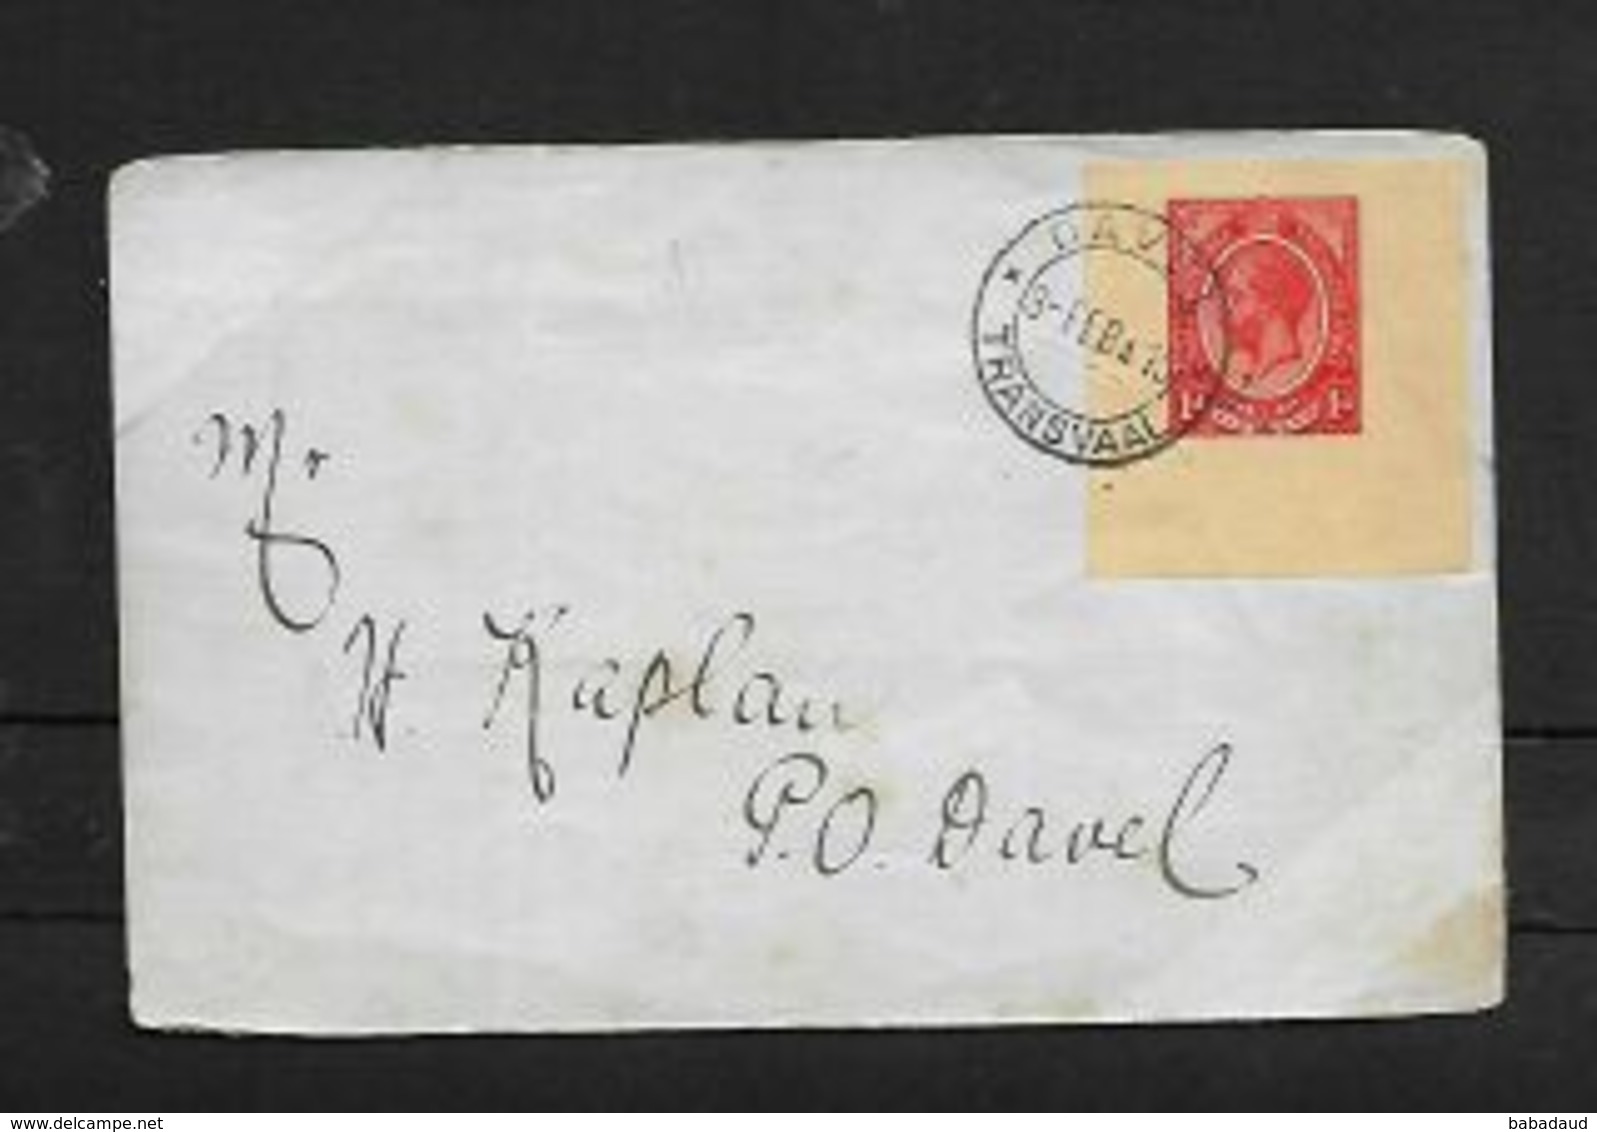 S.Africa, 1d Wrapper Cut Out, On Cover, DAVEL TRANSVAAL 3-FEB 15 C.d.s. > Davel - Covers & Documents